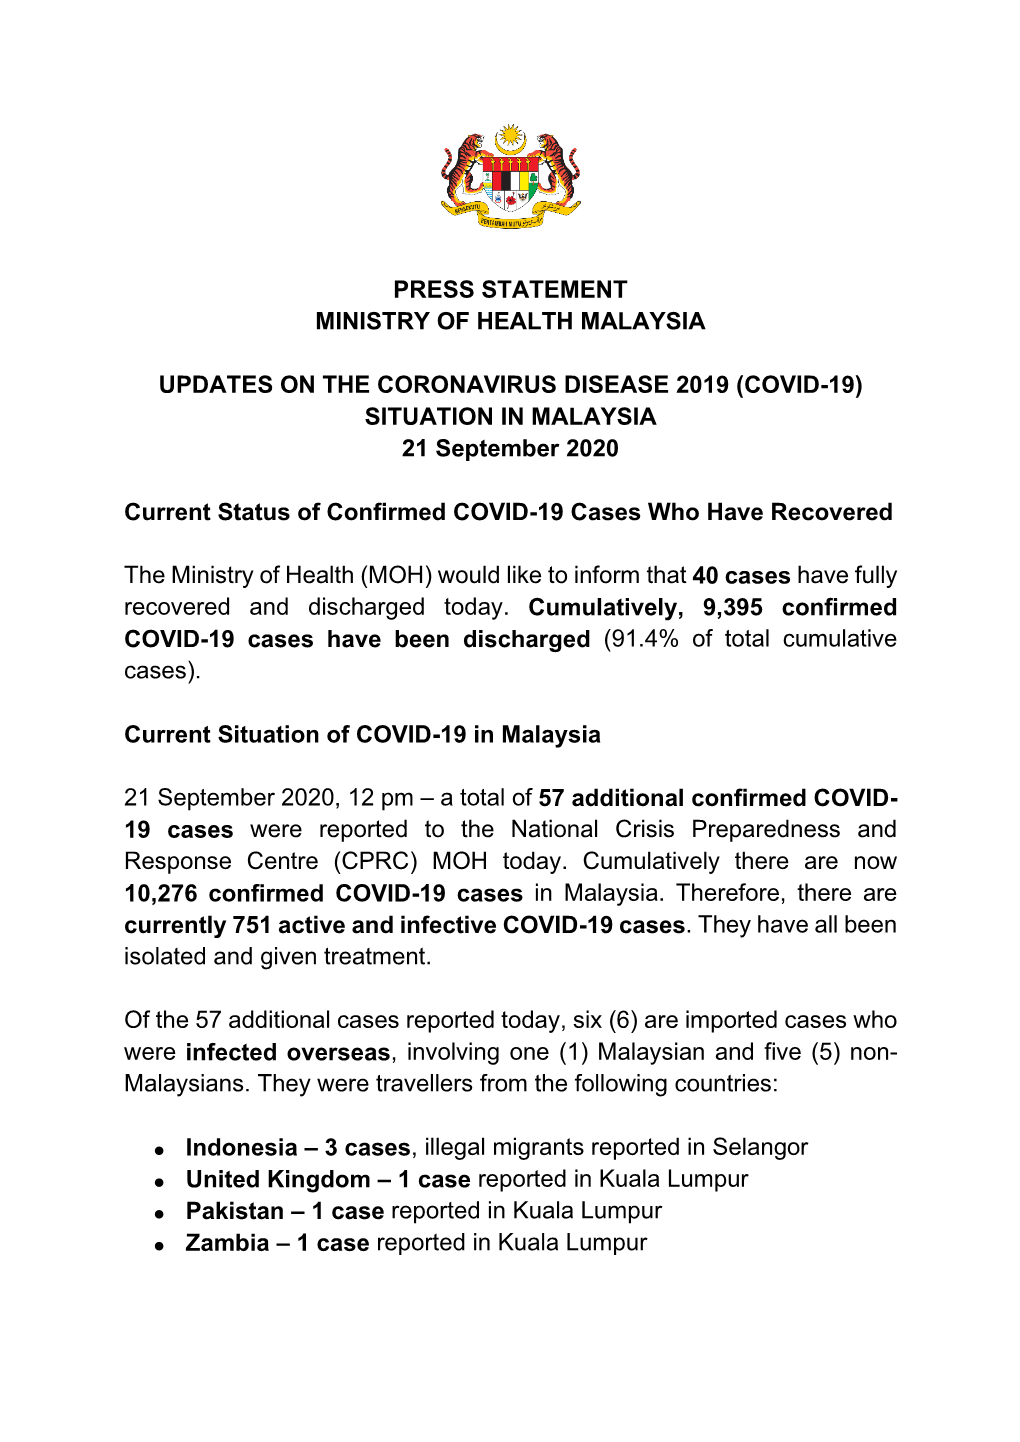 (COVID-19) SITUATION in MALAYSIA 21 September 2020